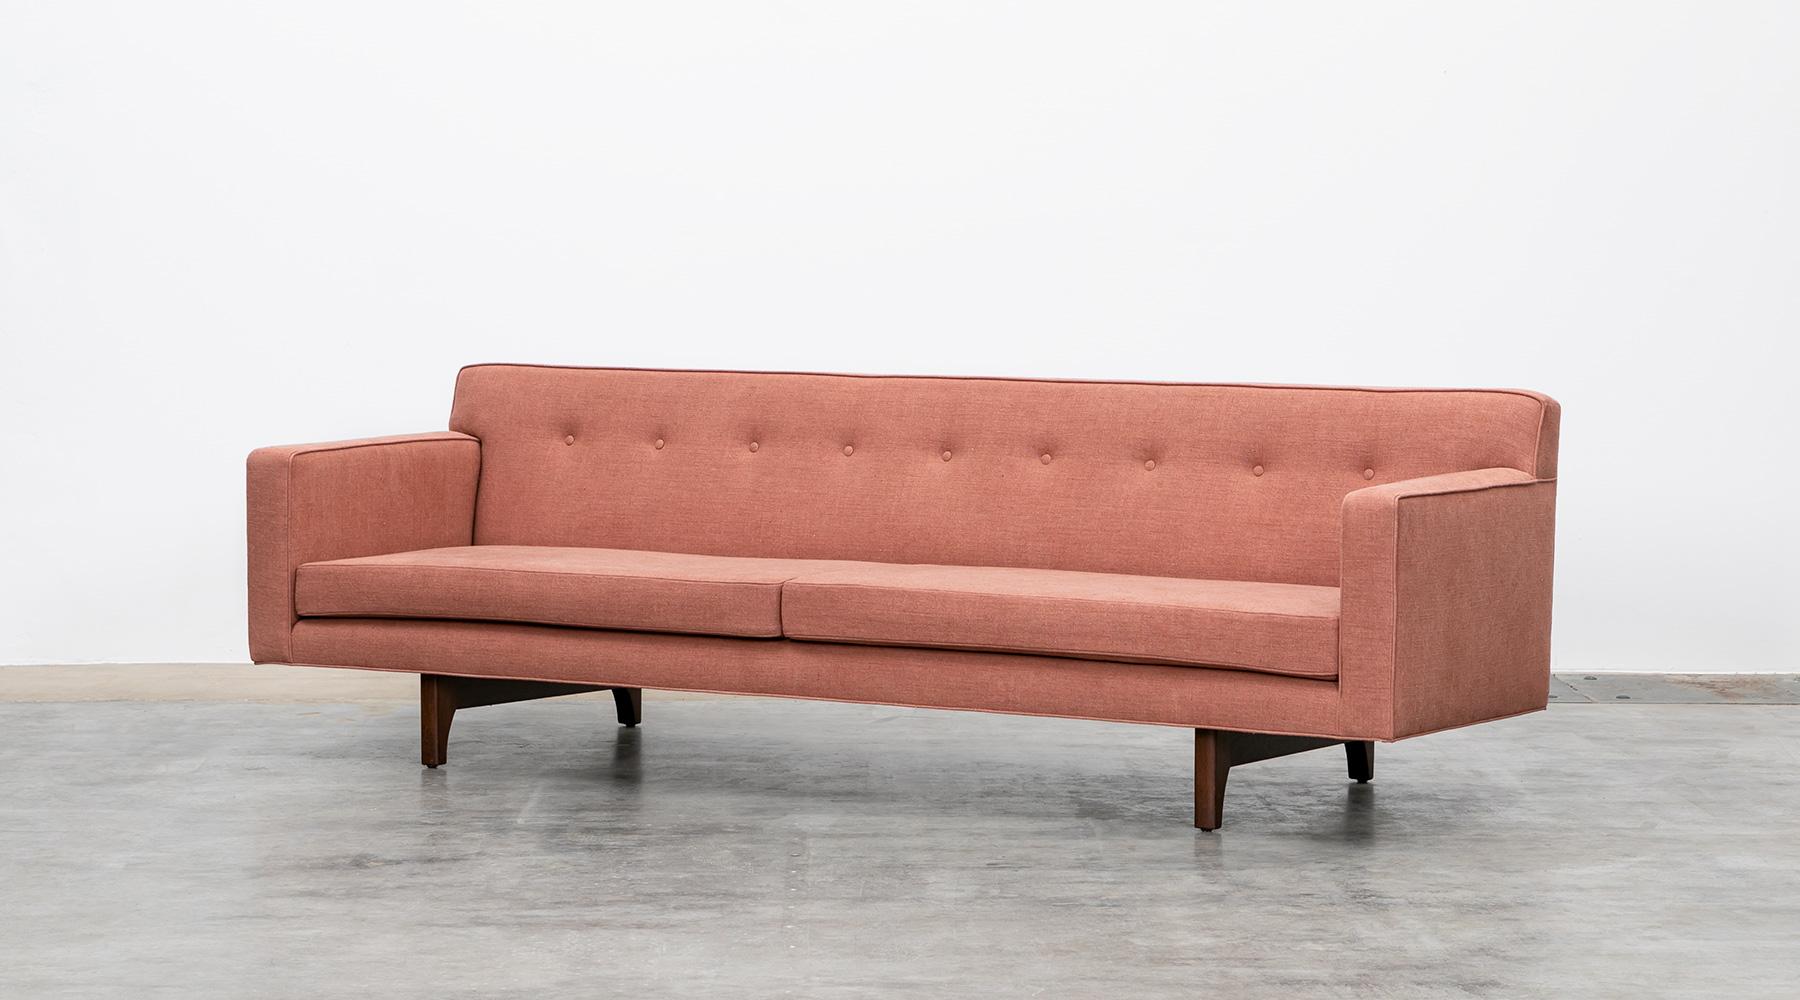 Three-seater sofa, new upholstery, wooden legs, Edward Wormley, USA, 1955.

Impressively simple sofa designed by Edward Wormley. Manufactured by Dunbar. The clear-shaped, stunning and outlasting design makes this sofa a particularly unique piece -